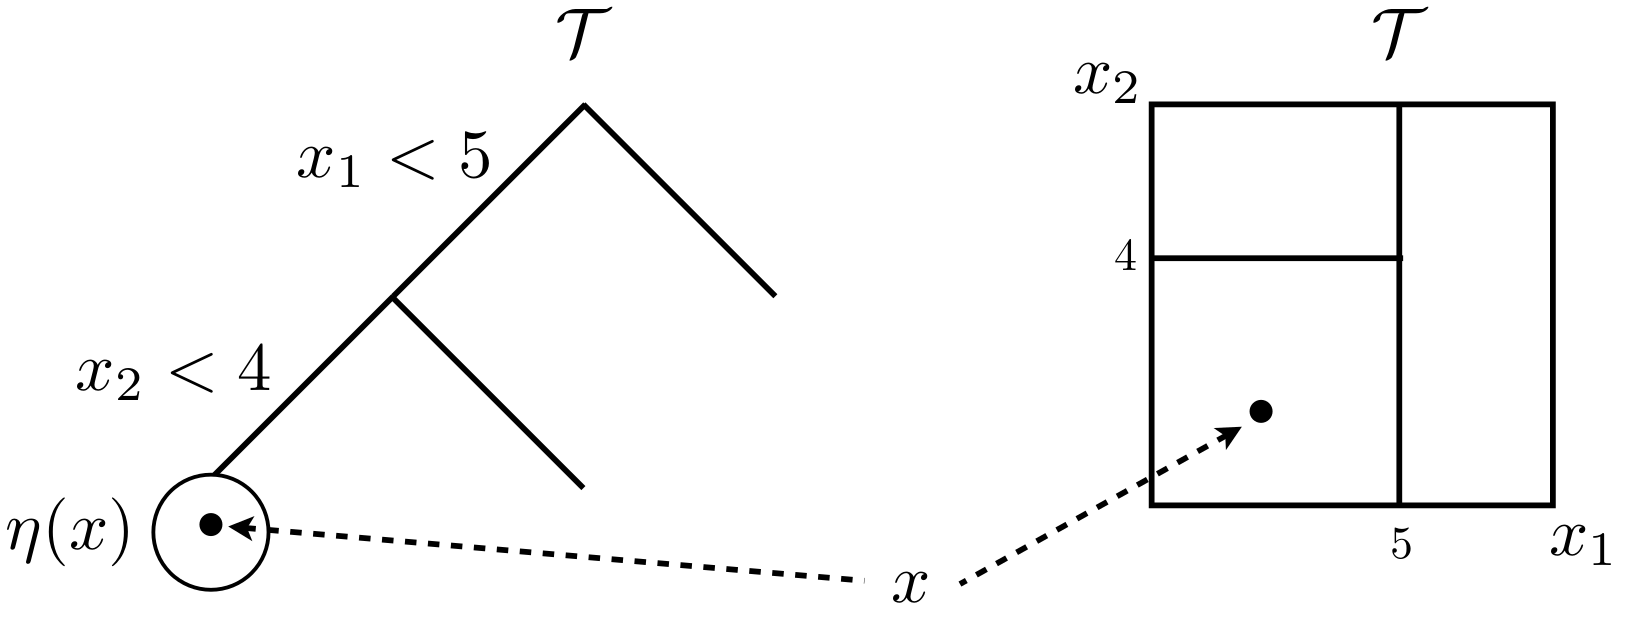 Tree graph (left) and partition of a 2d input space (right). Borrowed from Chipman et al. (2013) with many similar variations elsewhere; used with permission from Wiley.